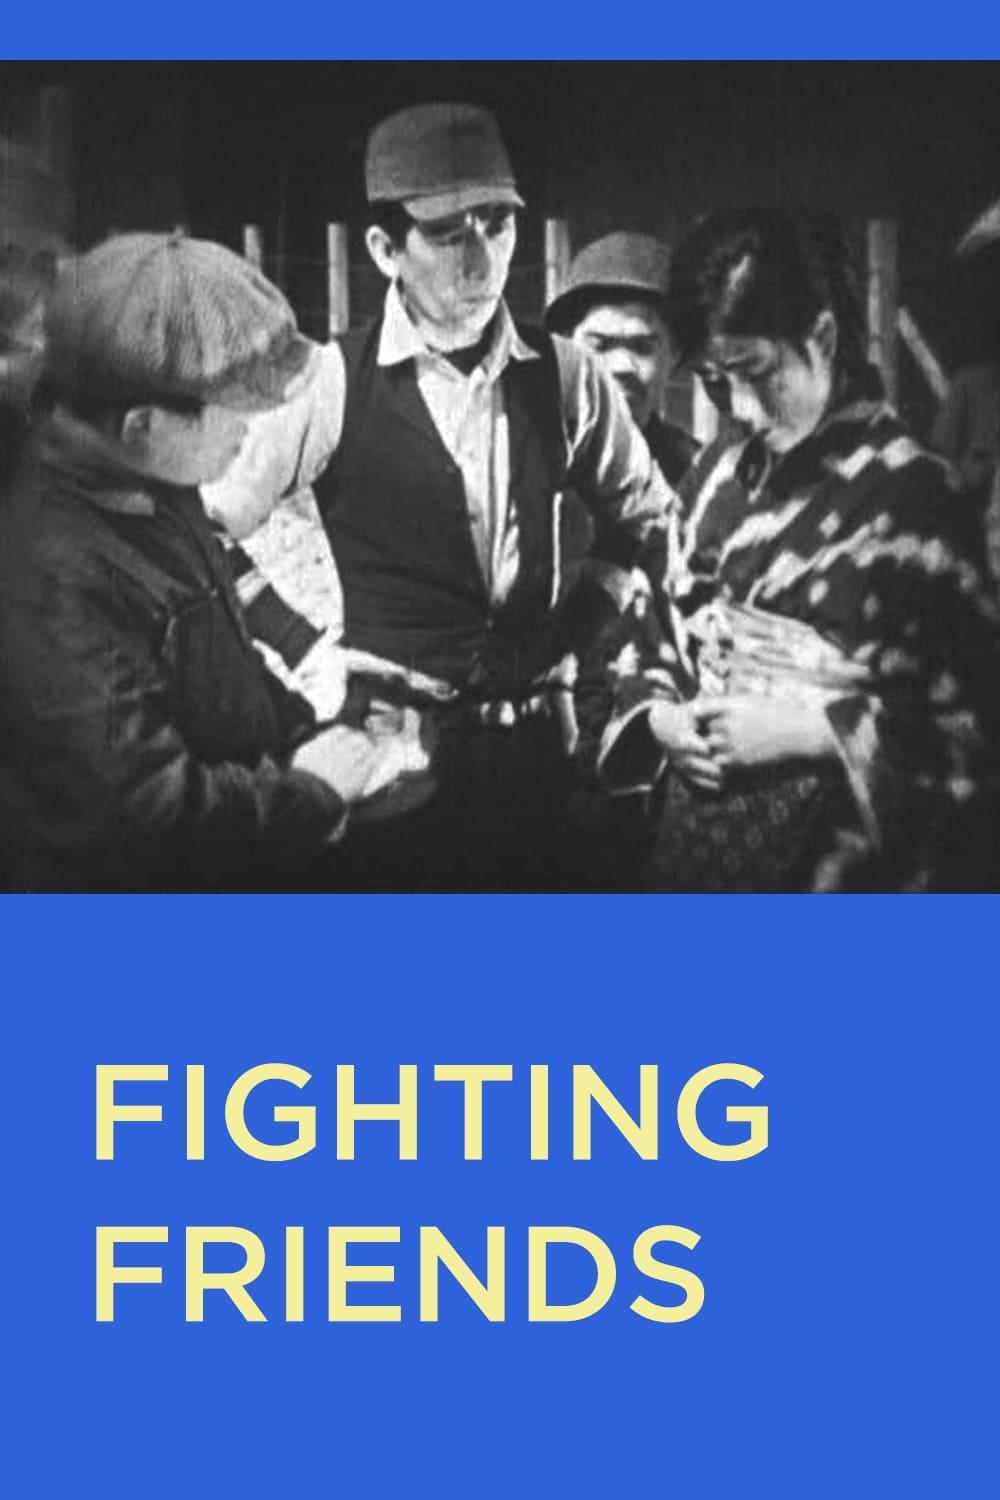 Fighting Friends poster